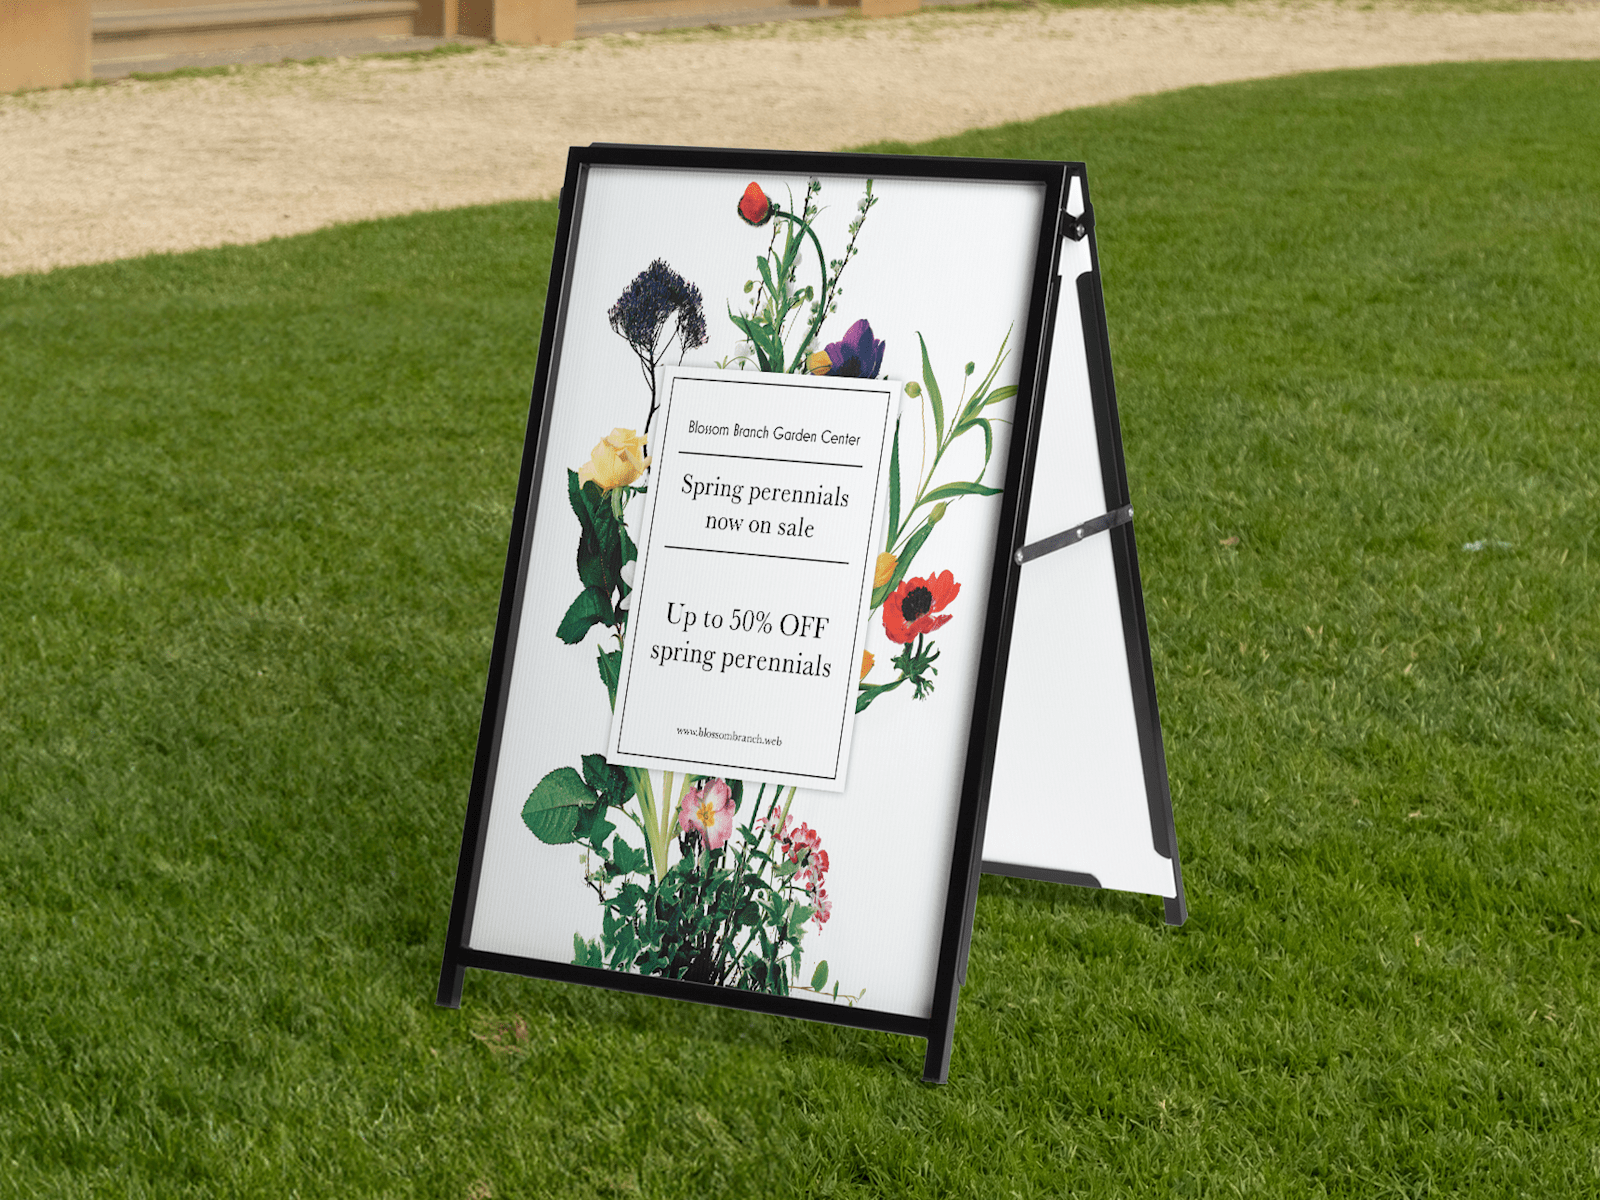 Outdoor A-Frame signage